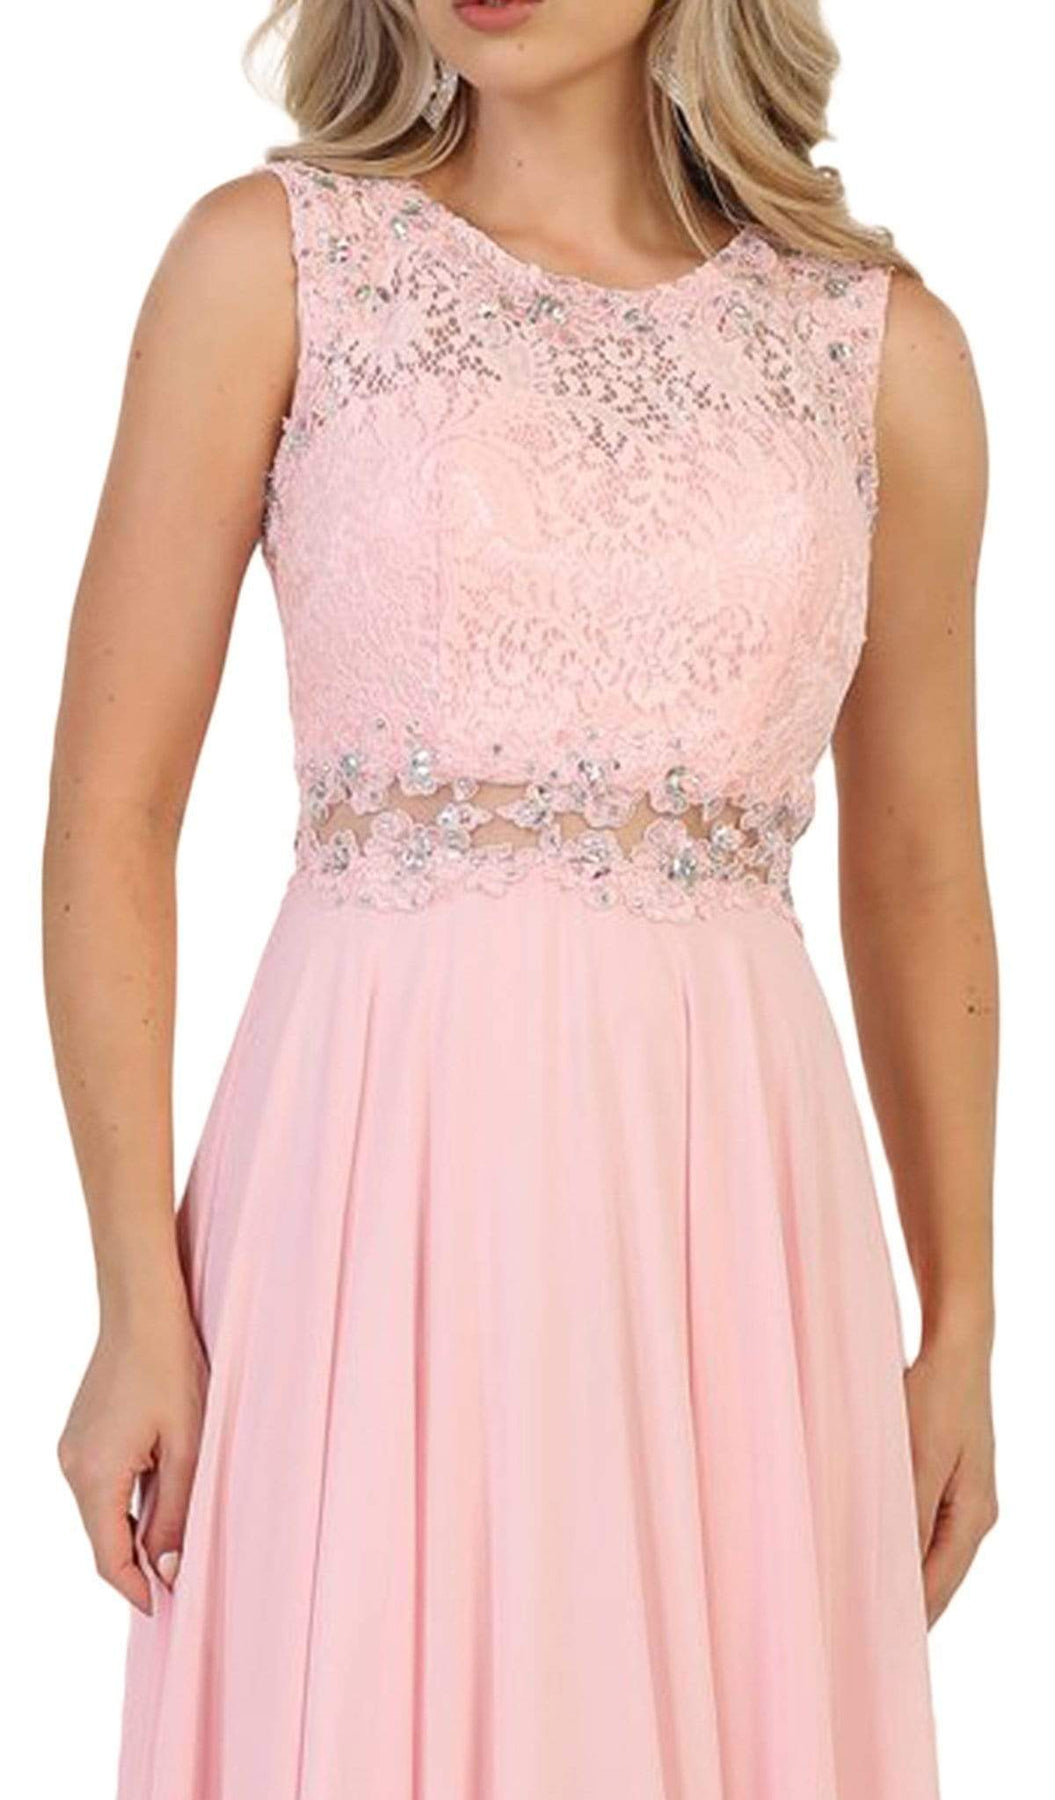 May Queen - Embellished Lace Pleated Prom Dress Bridesmaid Dresses